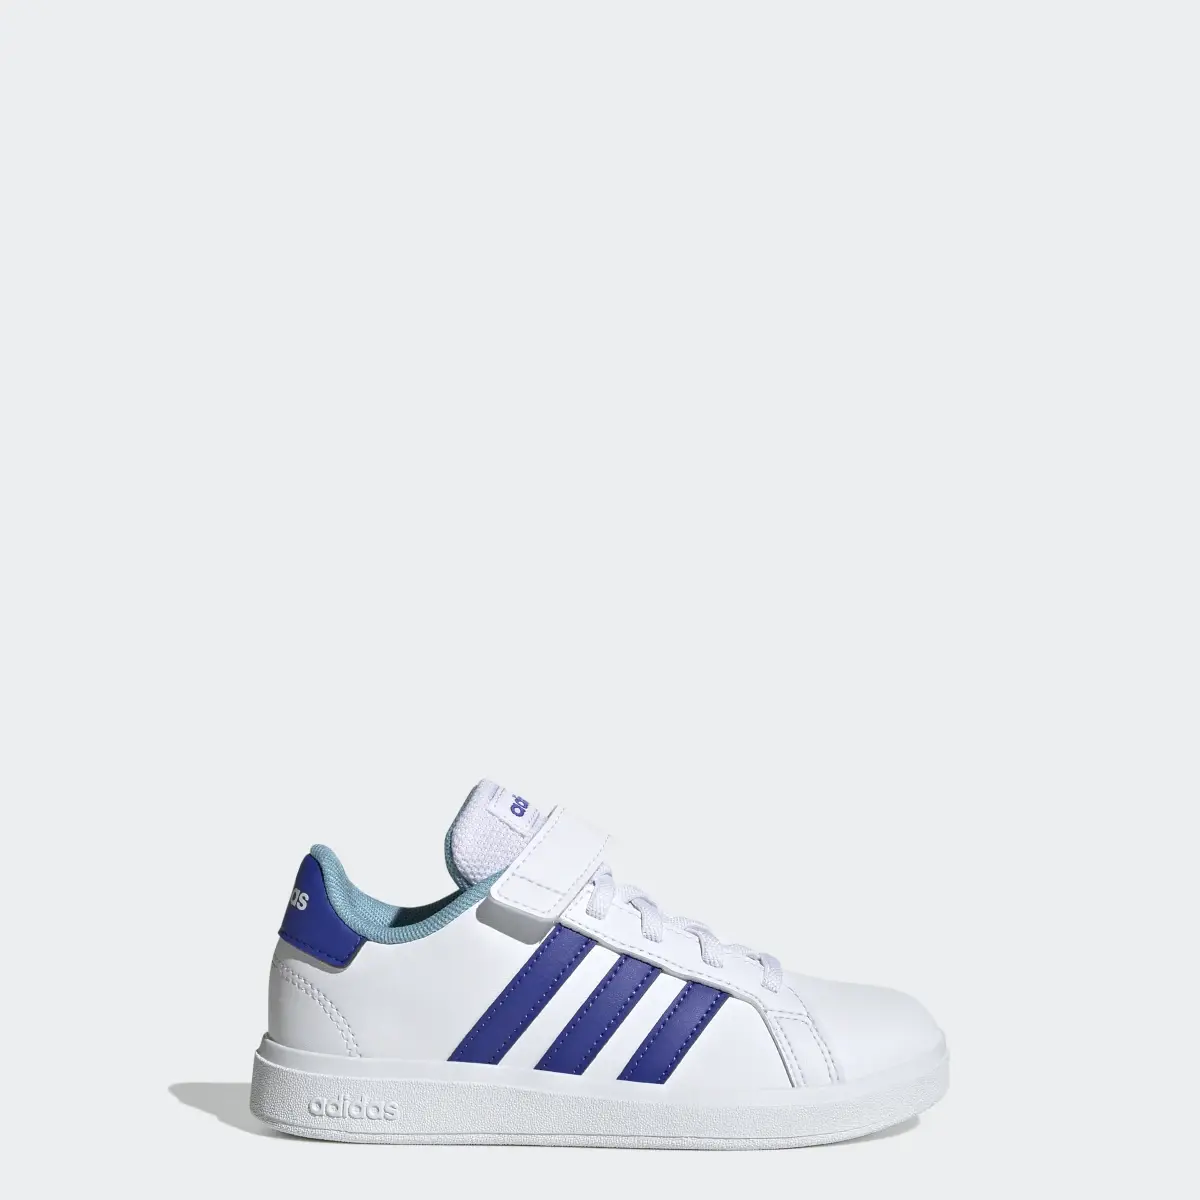 Adidas Grand Court Elastic Lace and Top Strap Ayakkabı. 1